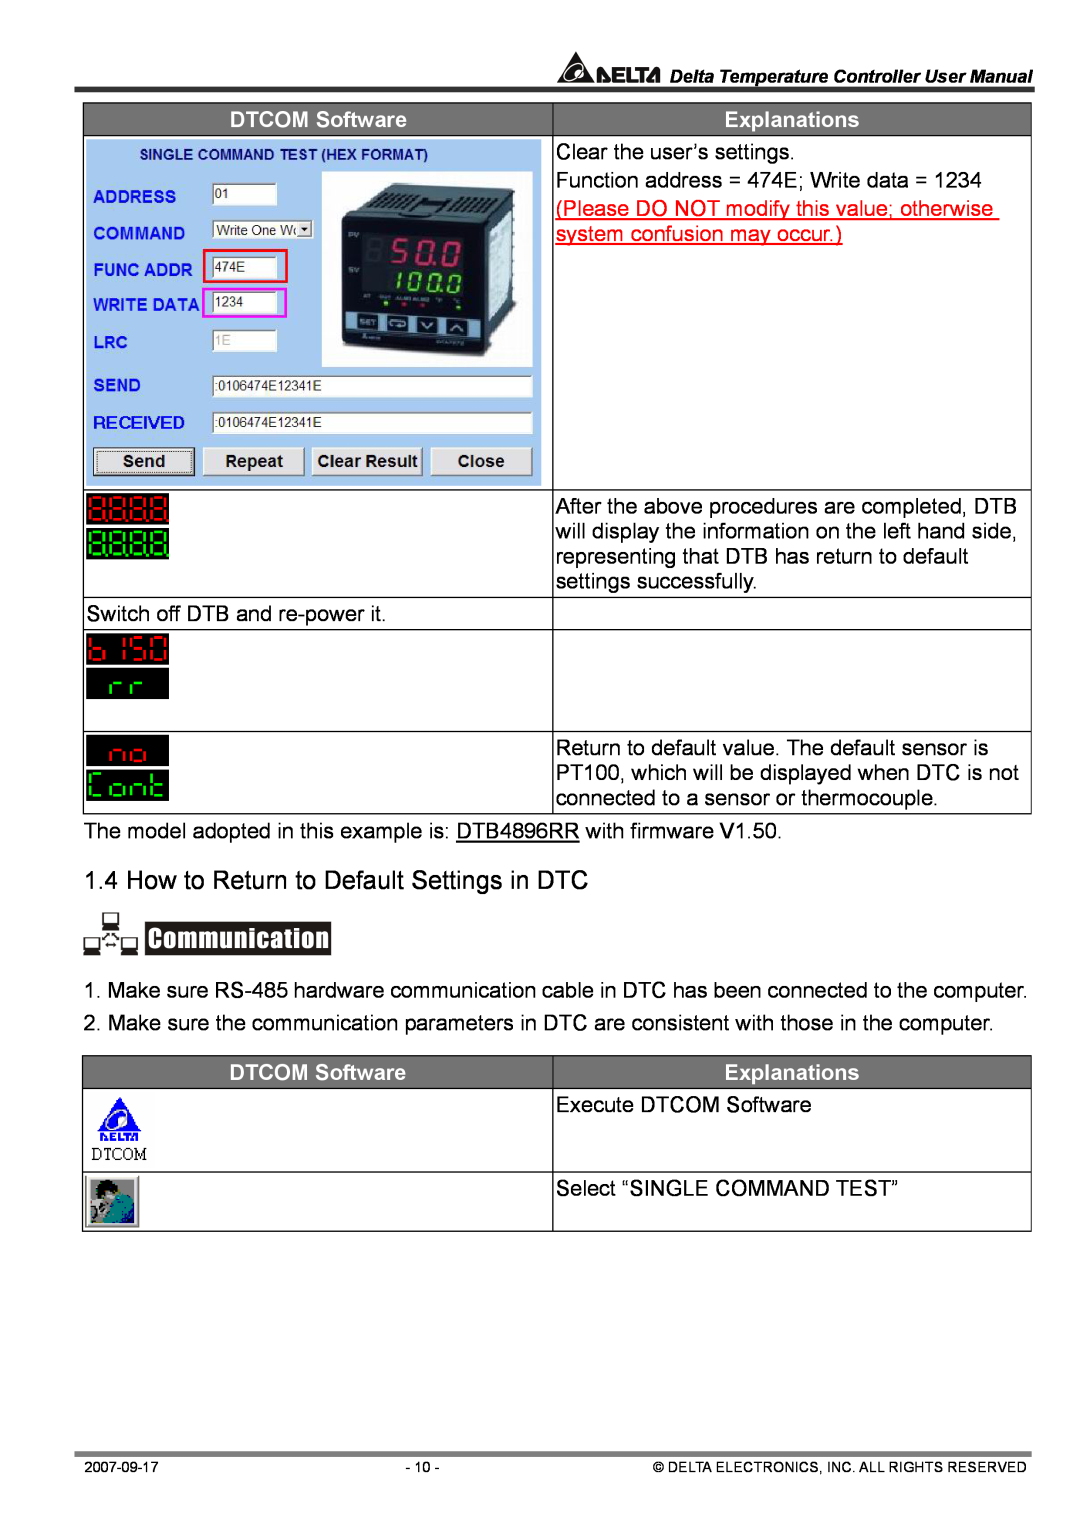 Delta Electronics DTC1000R, DTA4896R1 user manual How to Return to Default Settings in DTC, DTCOM Software, Explanations 